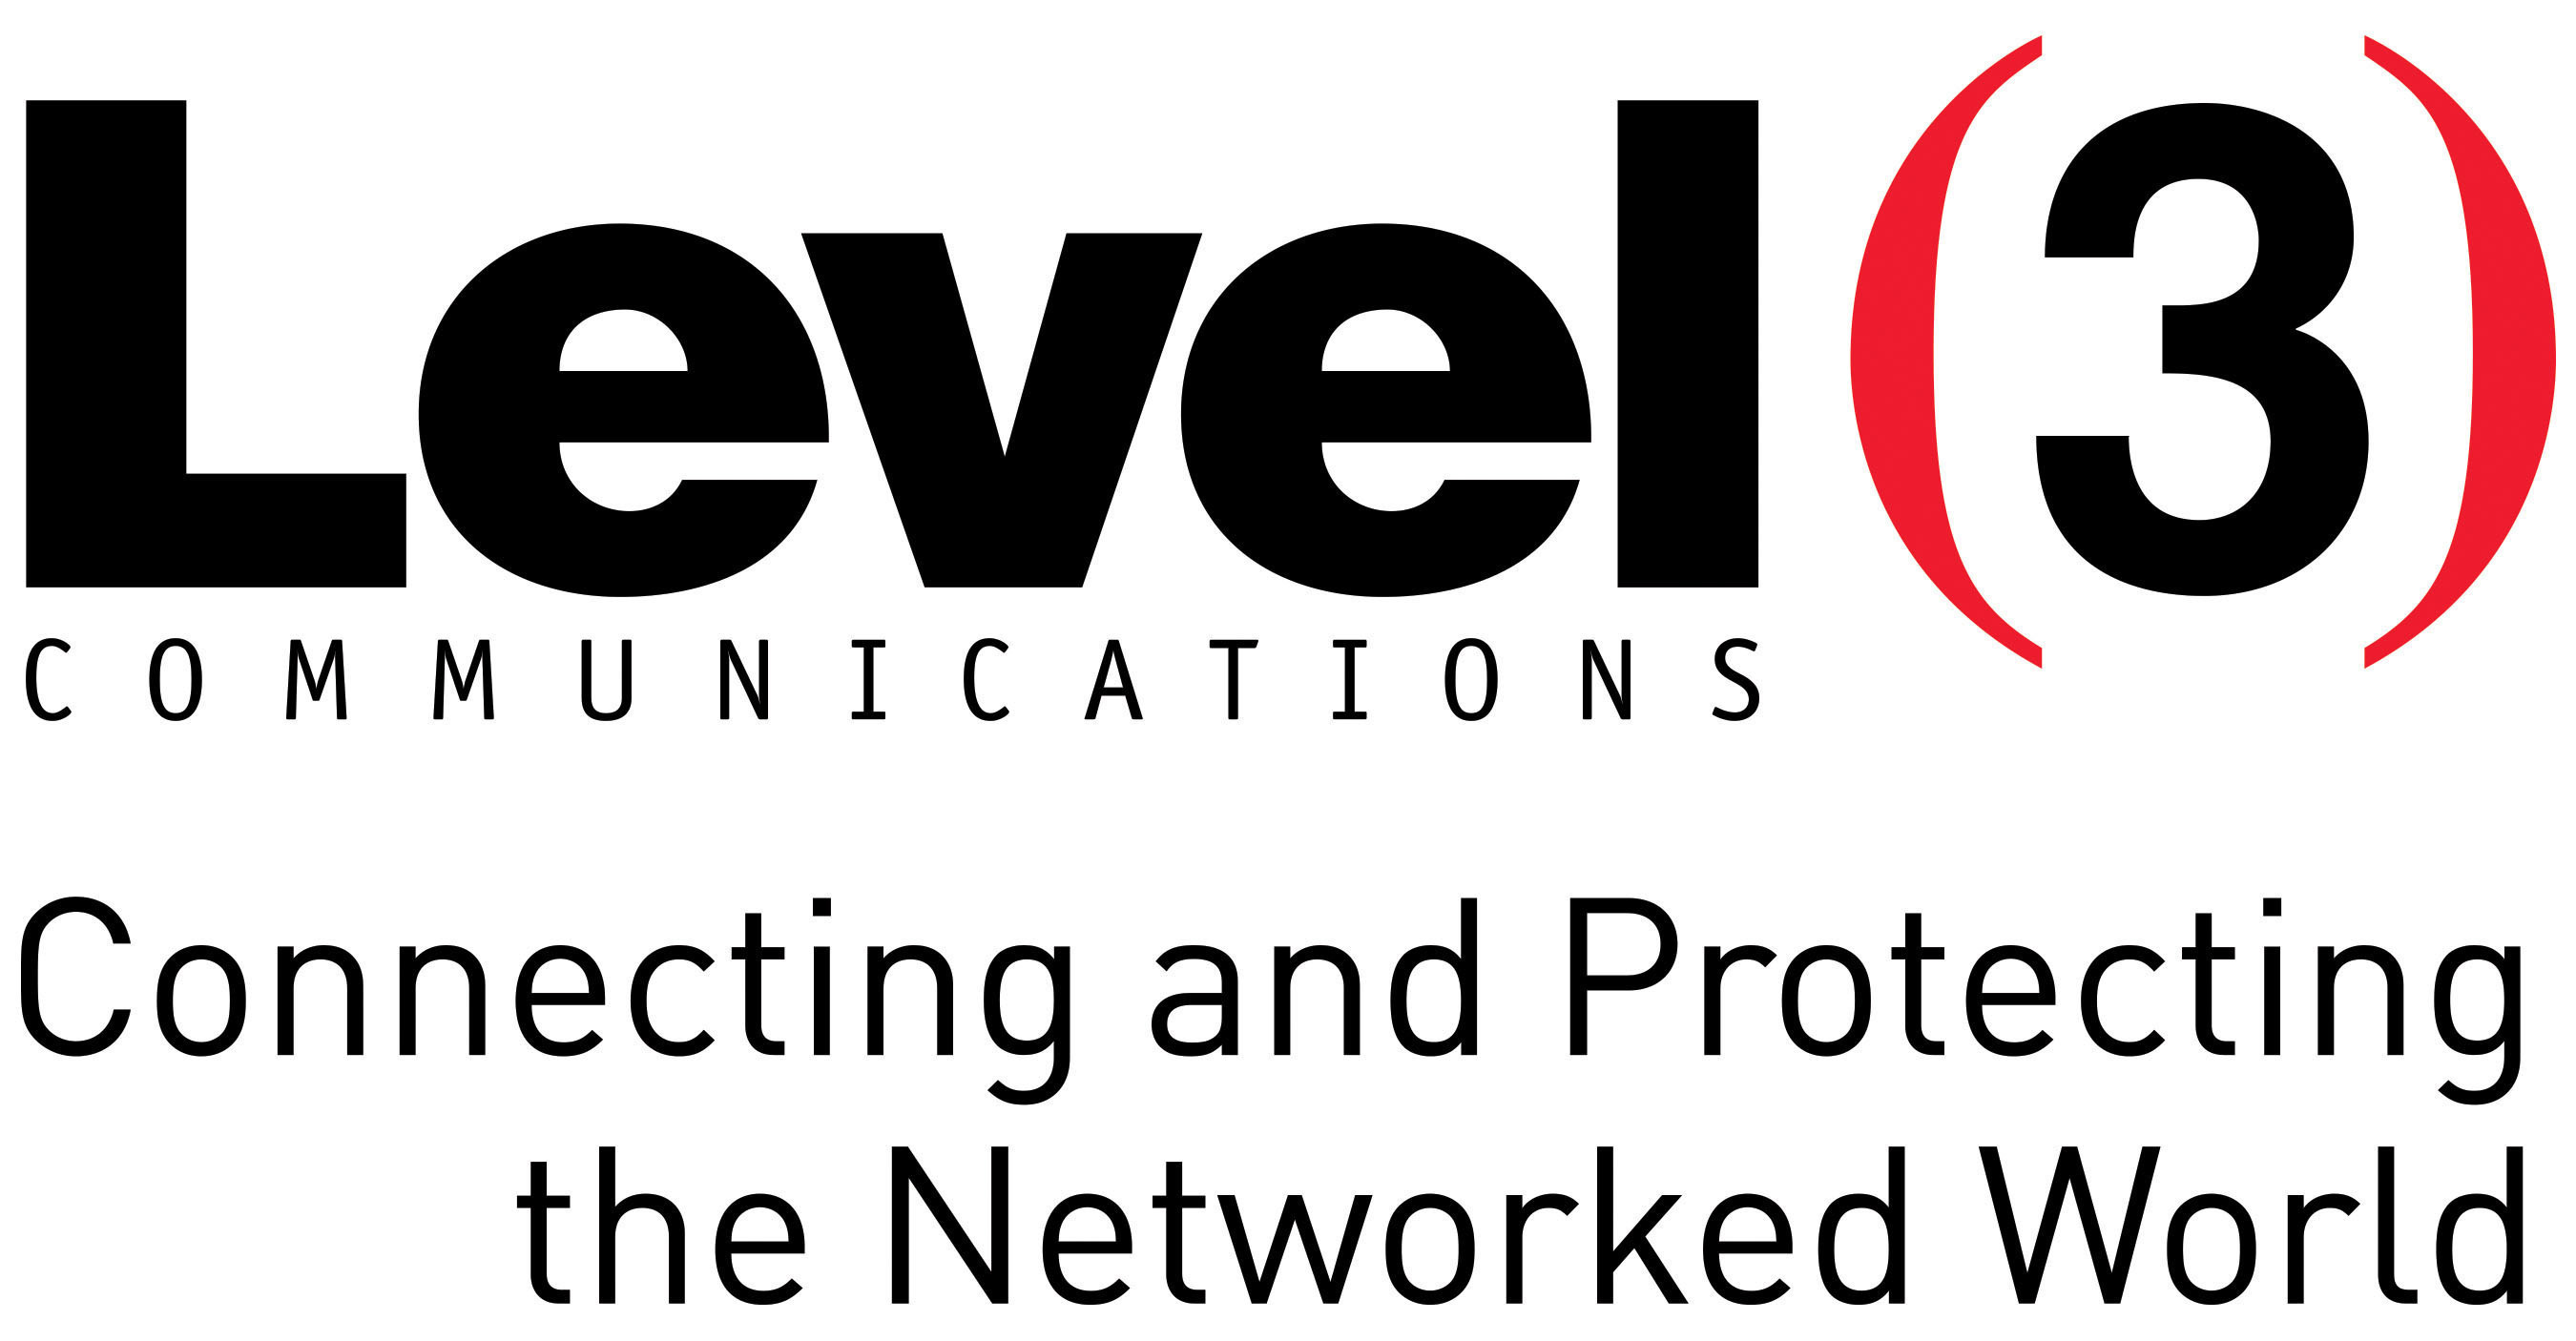 Level 3 Enhances Vyvx Network in U.S. to Address Growing Demand